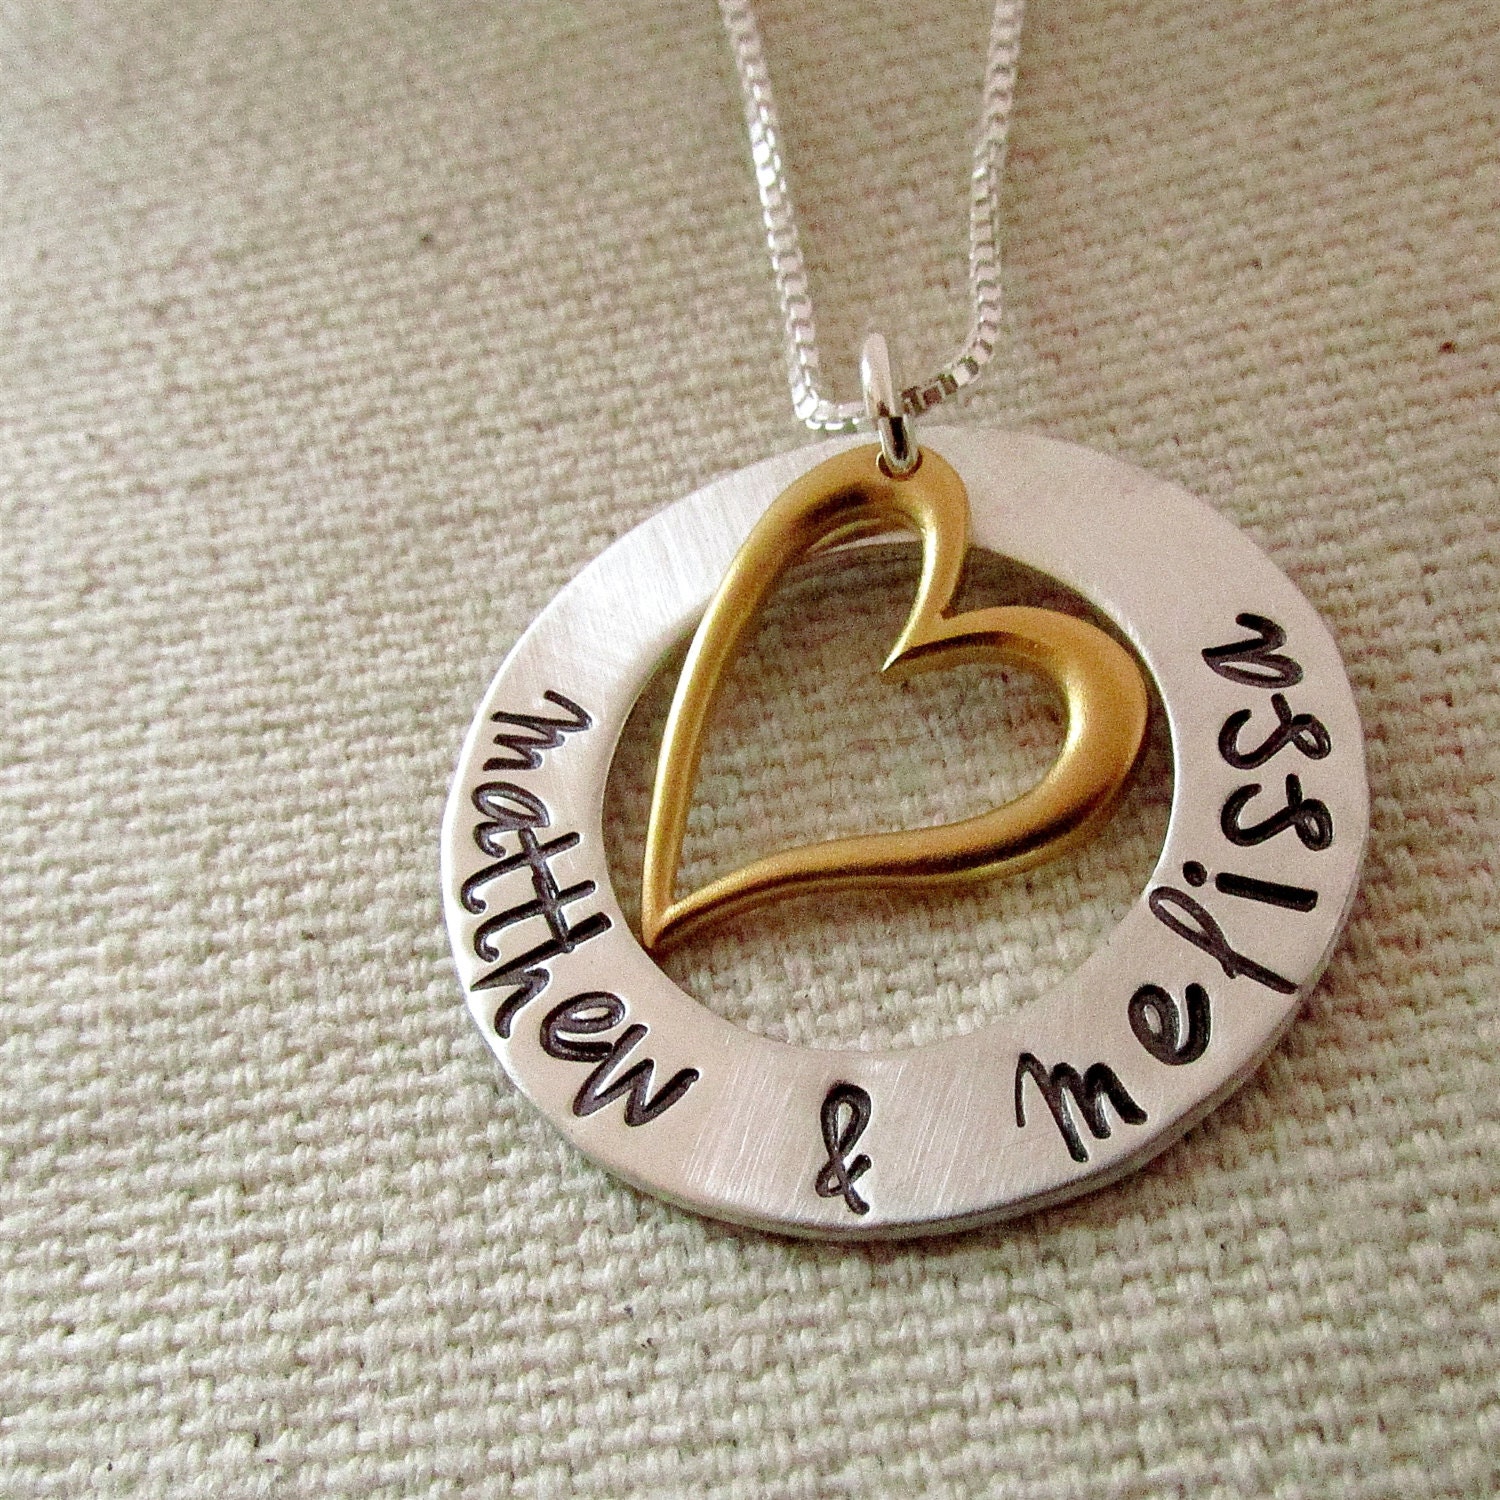 Personalized jewelry as anniversary gifts